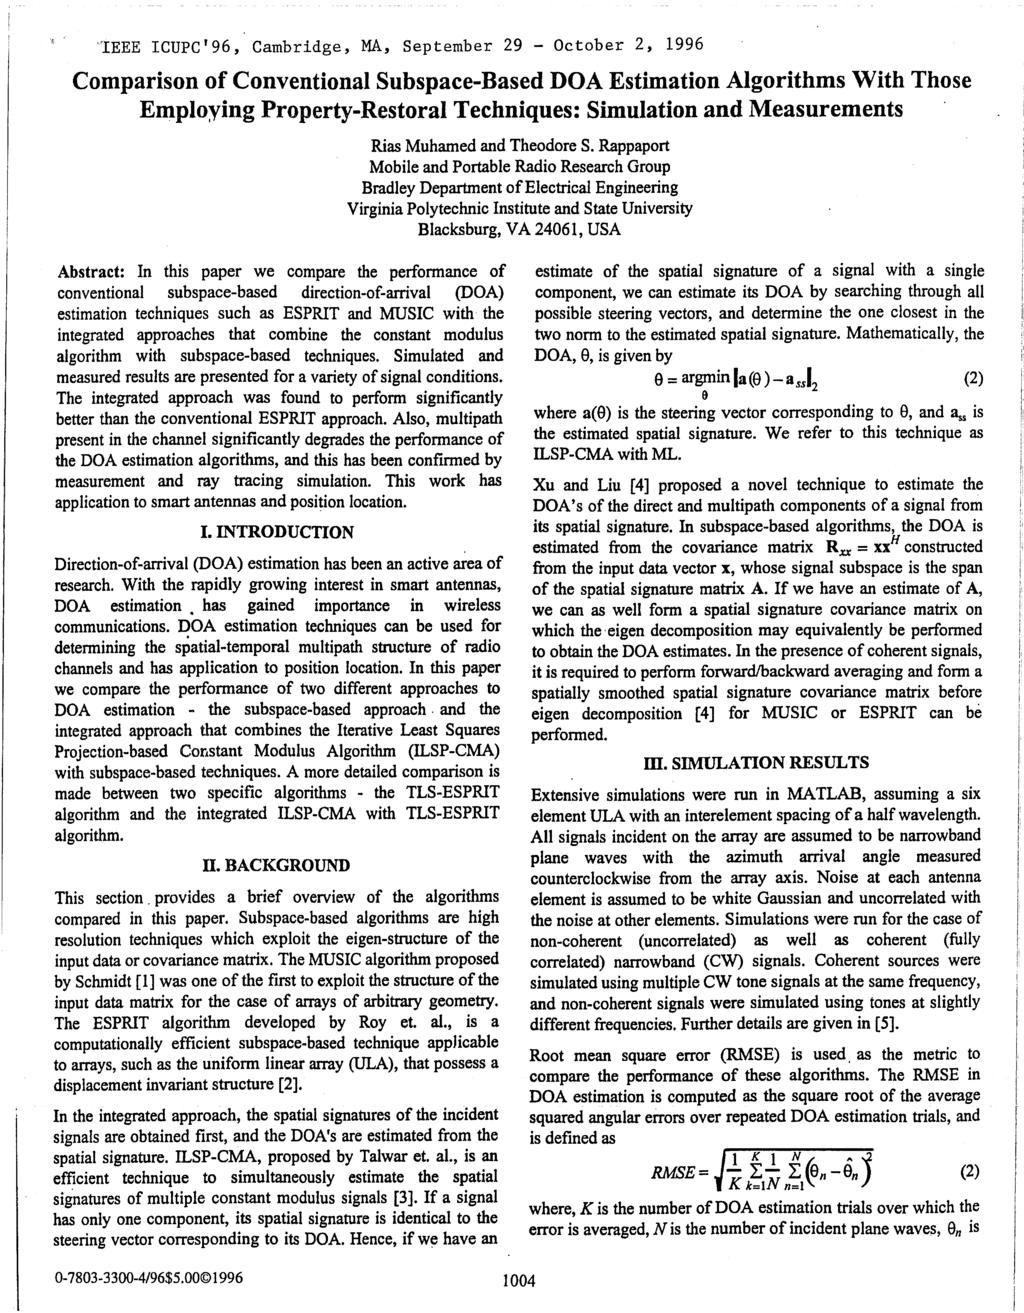 'EEE CUPC' 96, Cambridg, MA, Sptmbr 29 - Octobr 2, 1996 Comparison of Convntional Subspac-Basd DOA Estimation Algorithms With Thos Employing Proprty-Rstoral Tchniqus: Simulation and Masurmnts Rias